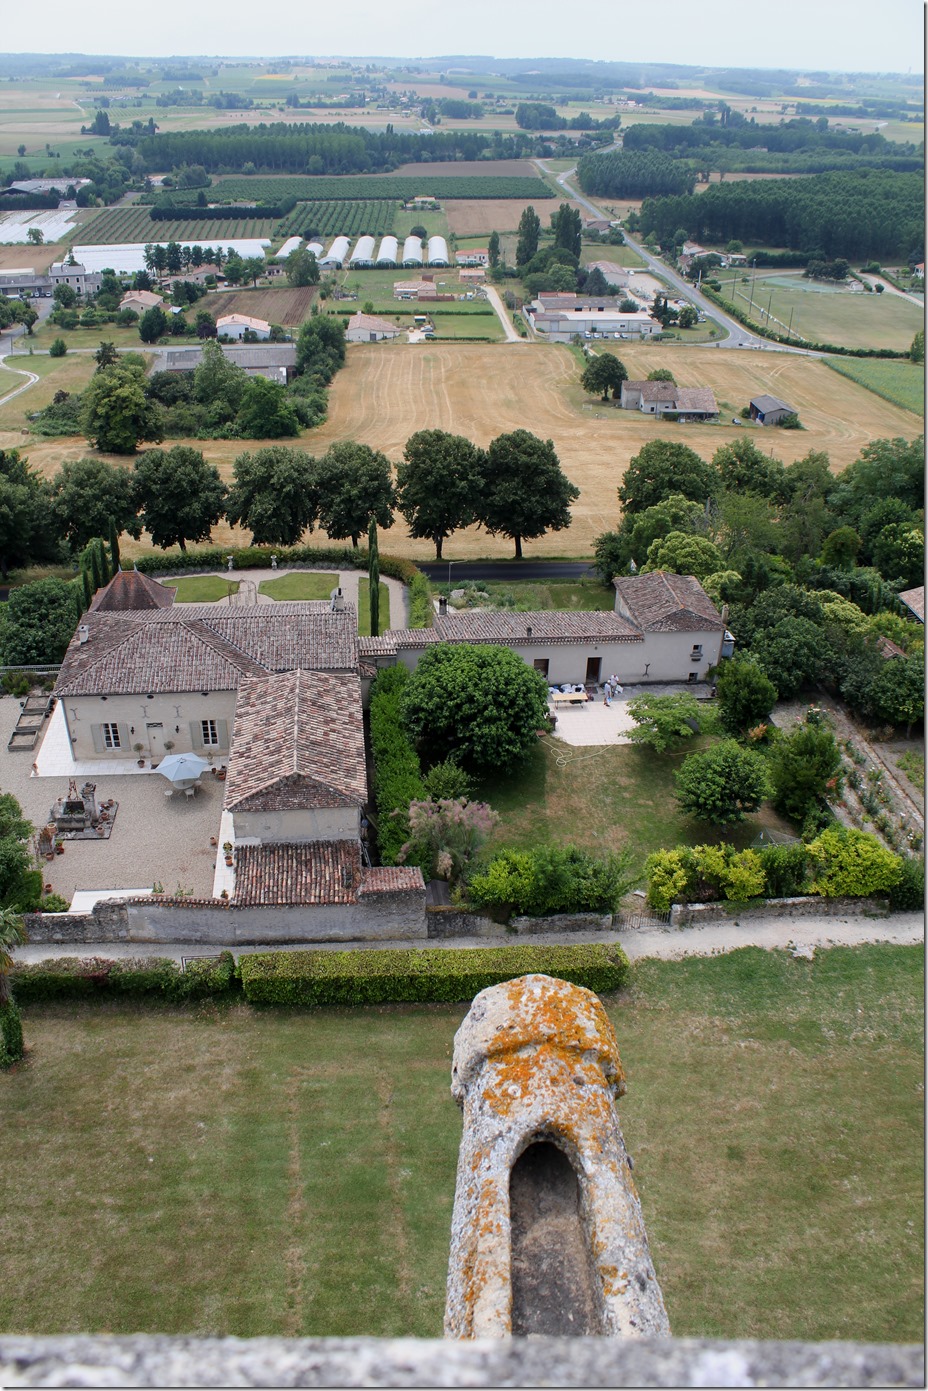 View from the tower of the castle